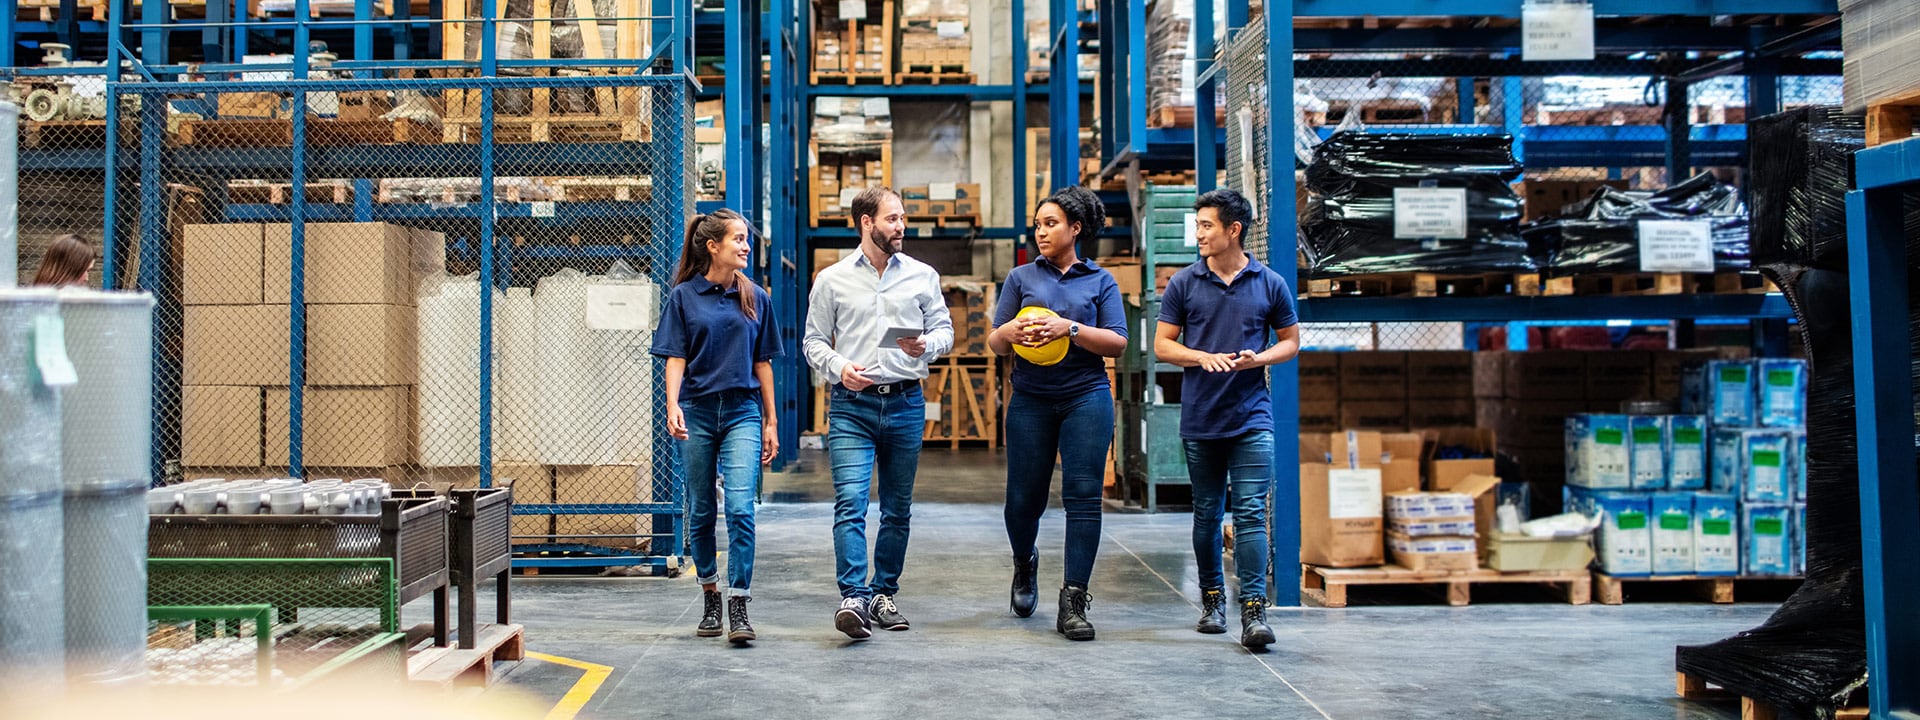 employees in warehouse